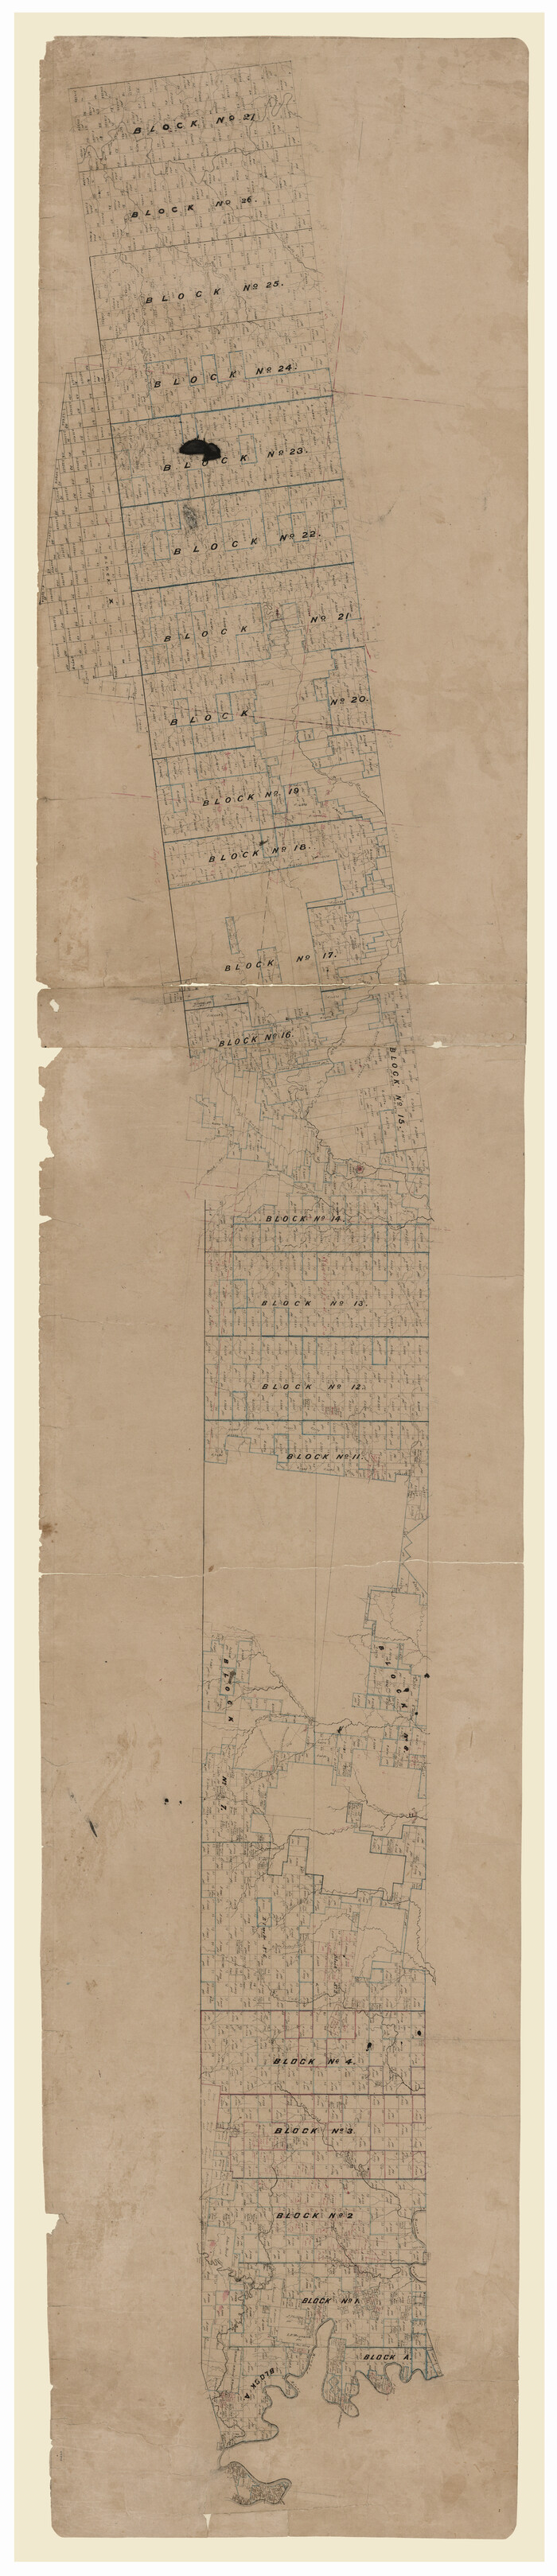 93460, [Map of Texas and Pacific Blocks from Brazos River westward through Palo Pinto, Stephens, Shackelford, Jones, Callahan, Taylor, Fisher, Nolan and Mitchell Counties], General Map Collection